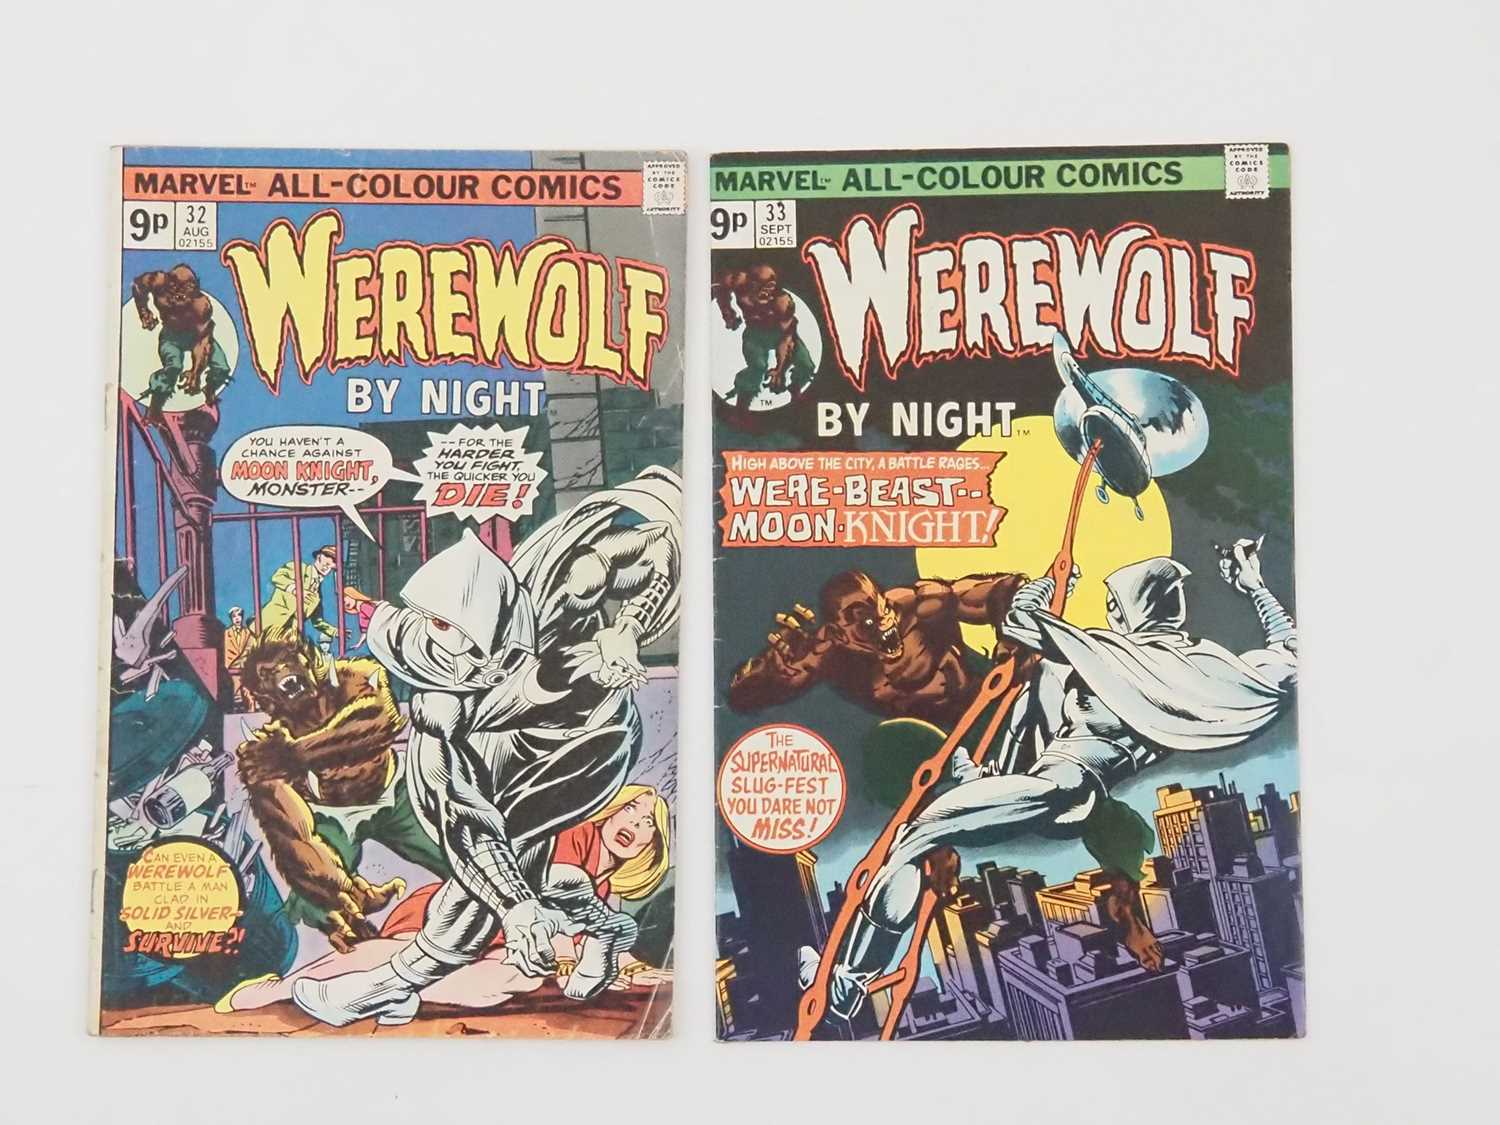 WEREWOLF BY NIGHT #32 & 33 (2 in Lot) - (1975 - MARVEL - UK Price Variant) - HOT Book - First and